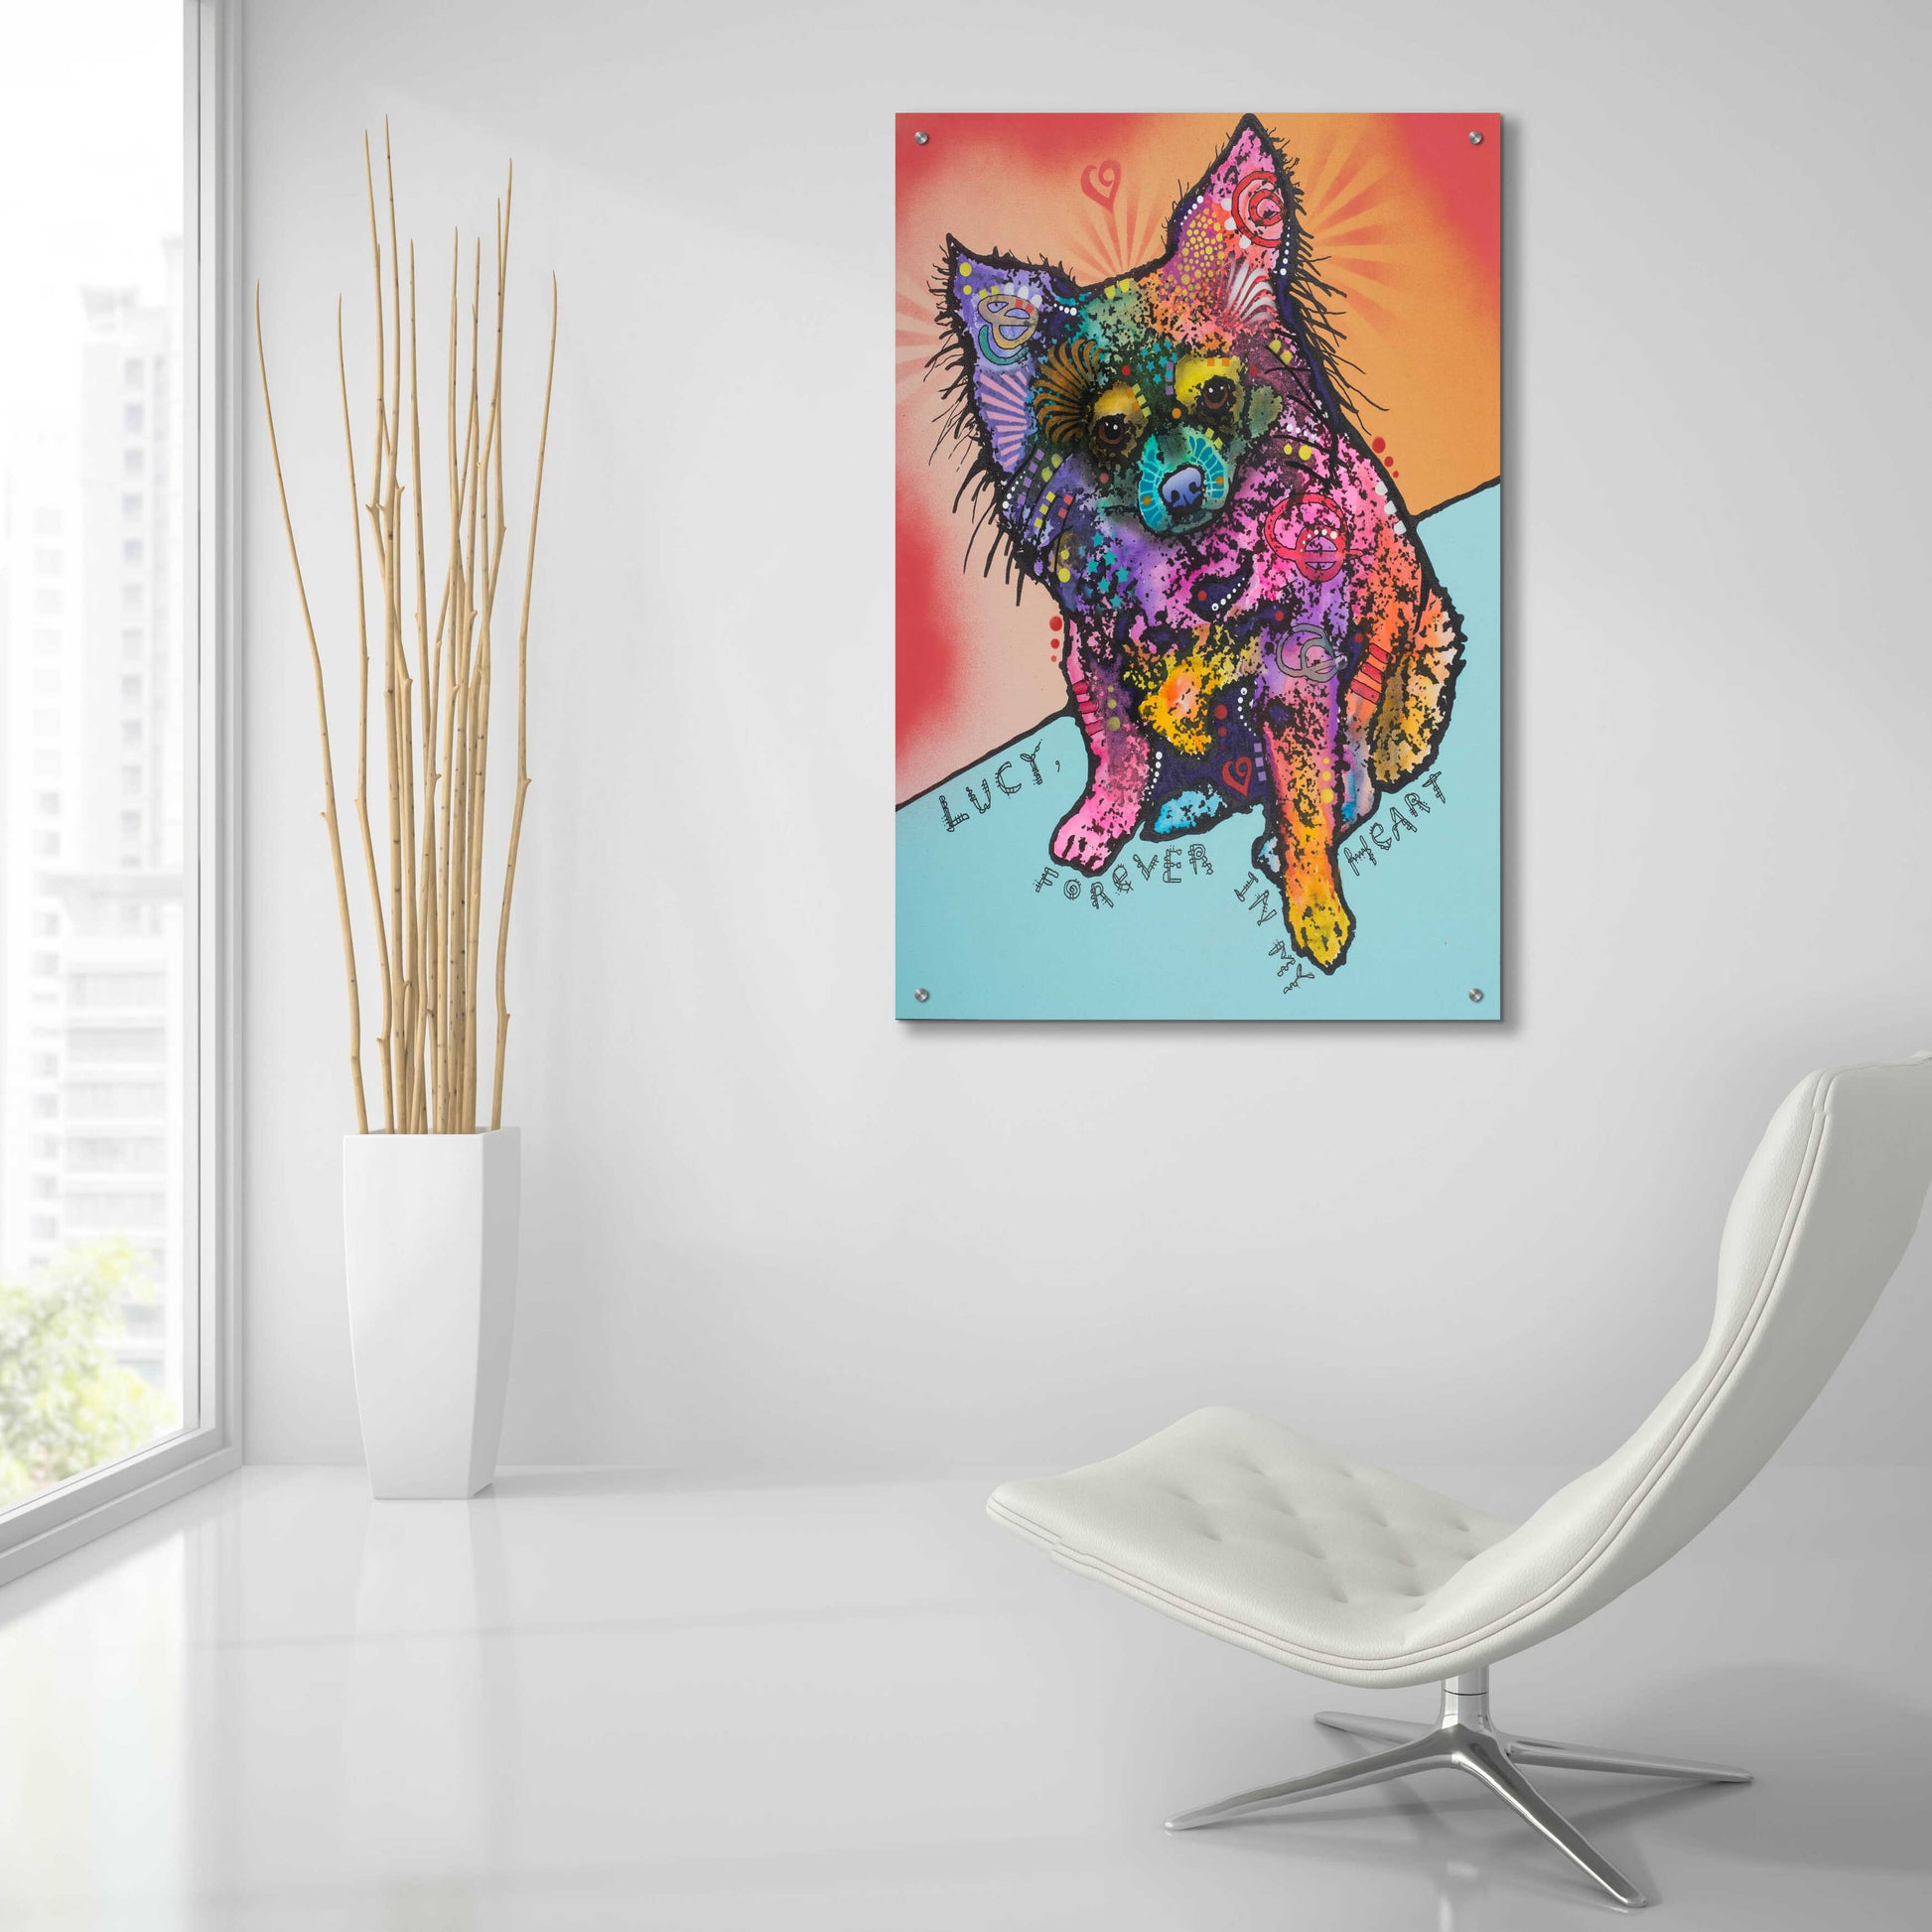 Epic Art 'Lucy B' by Dean Russo, Acrylic Glass Wall Art,24x36